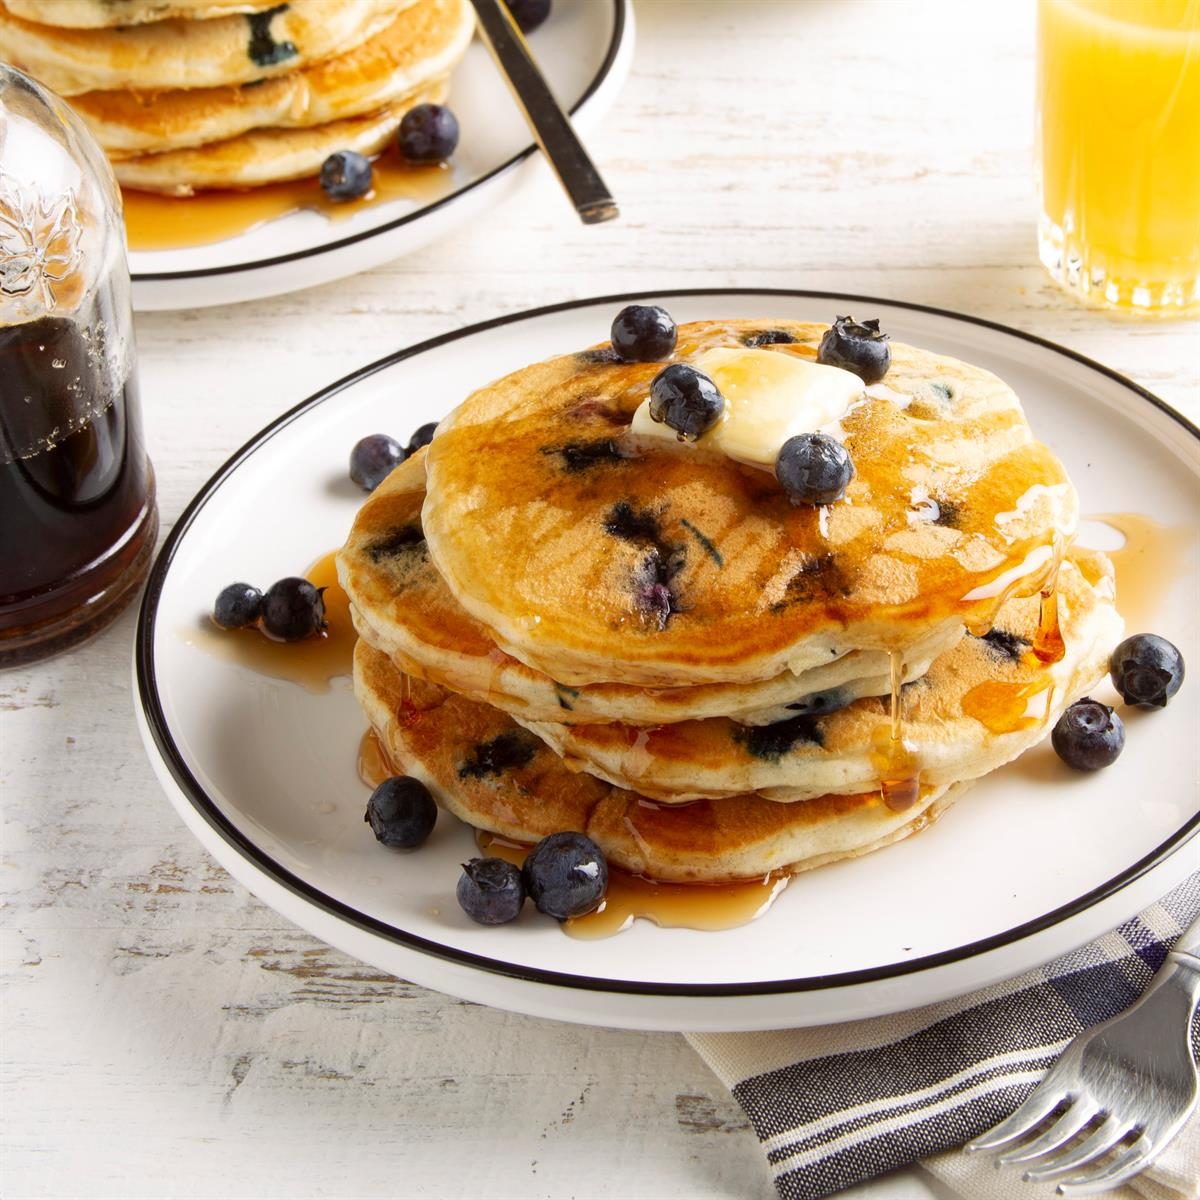 https://www.tasteofhome.com/wp-content/uploads/2018/01/Pancakes-for-Two_EXPS_FT21_1473_F_0624_1-12.jpg?fit=700%2C1024